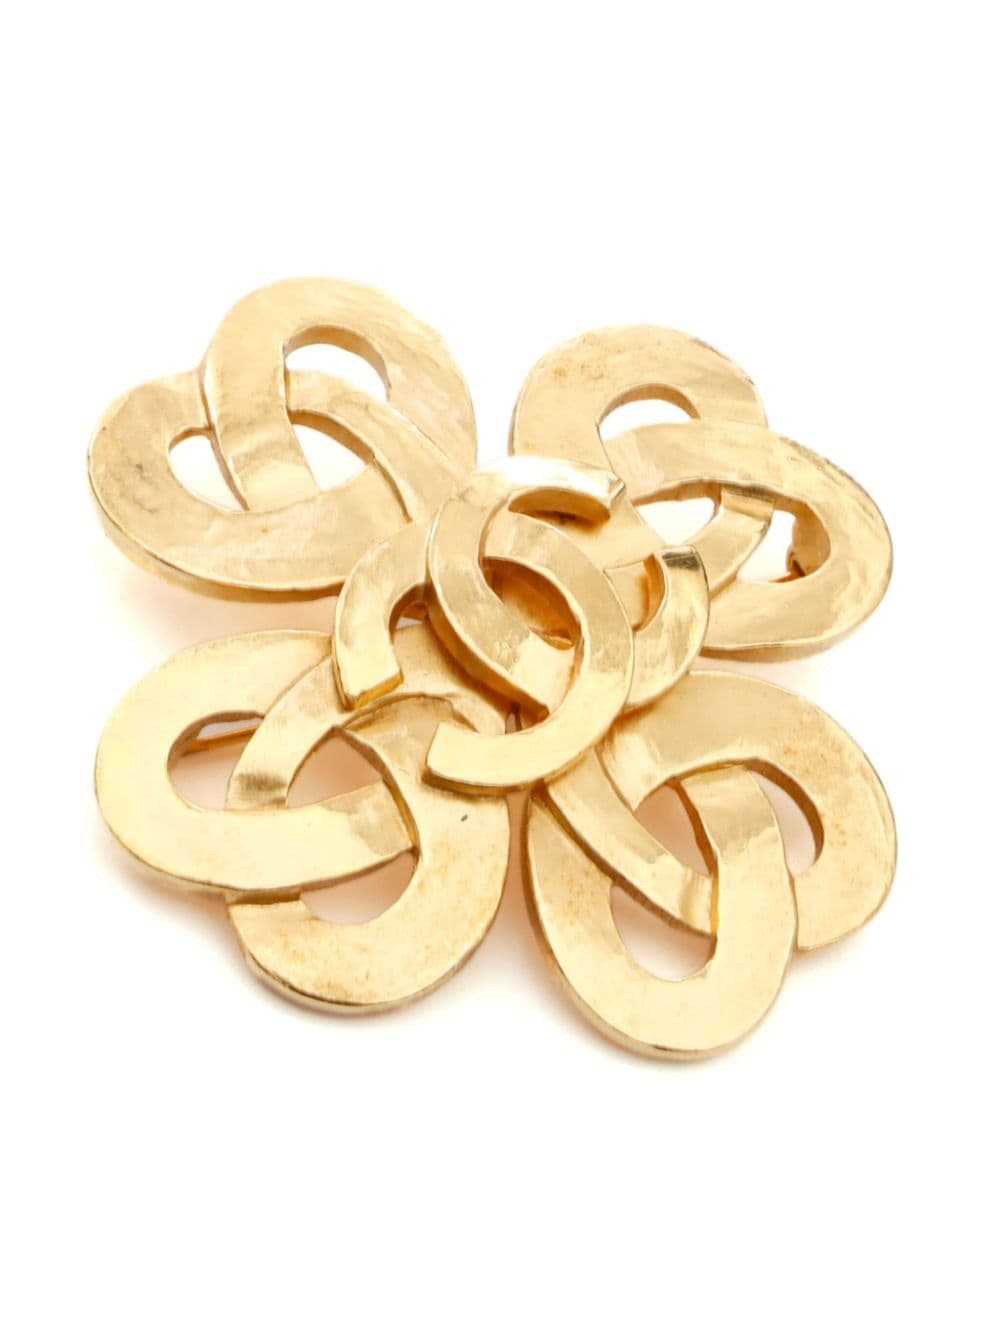 CHANEL Pre-Owned 1997 CC cross brooch - Gold - image 2